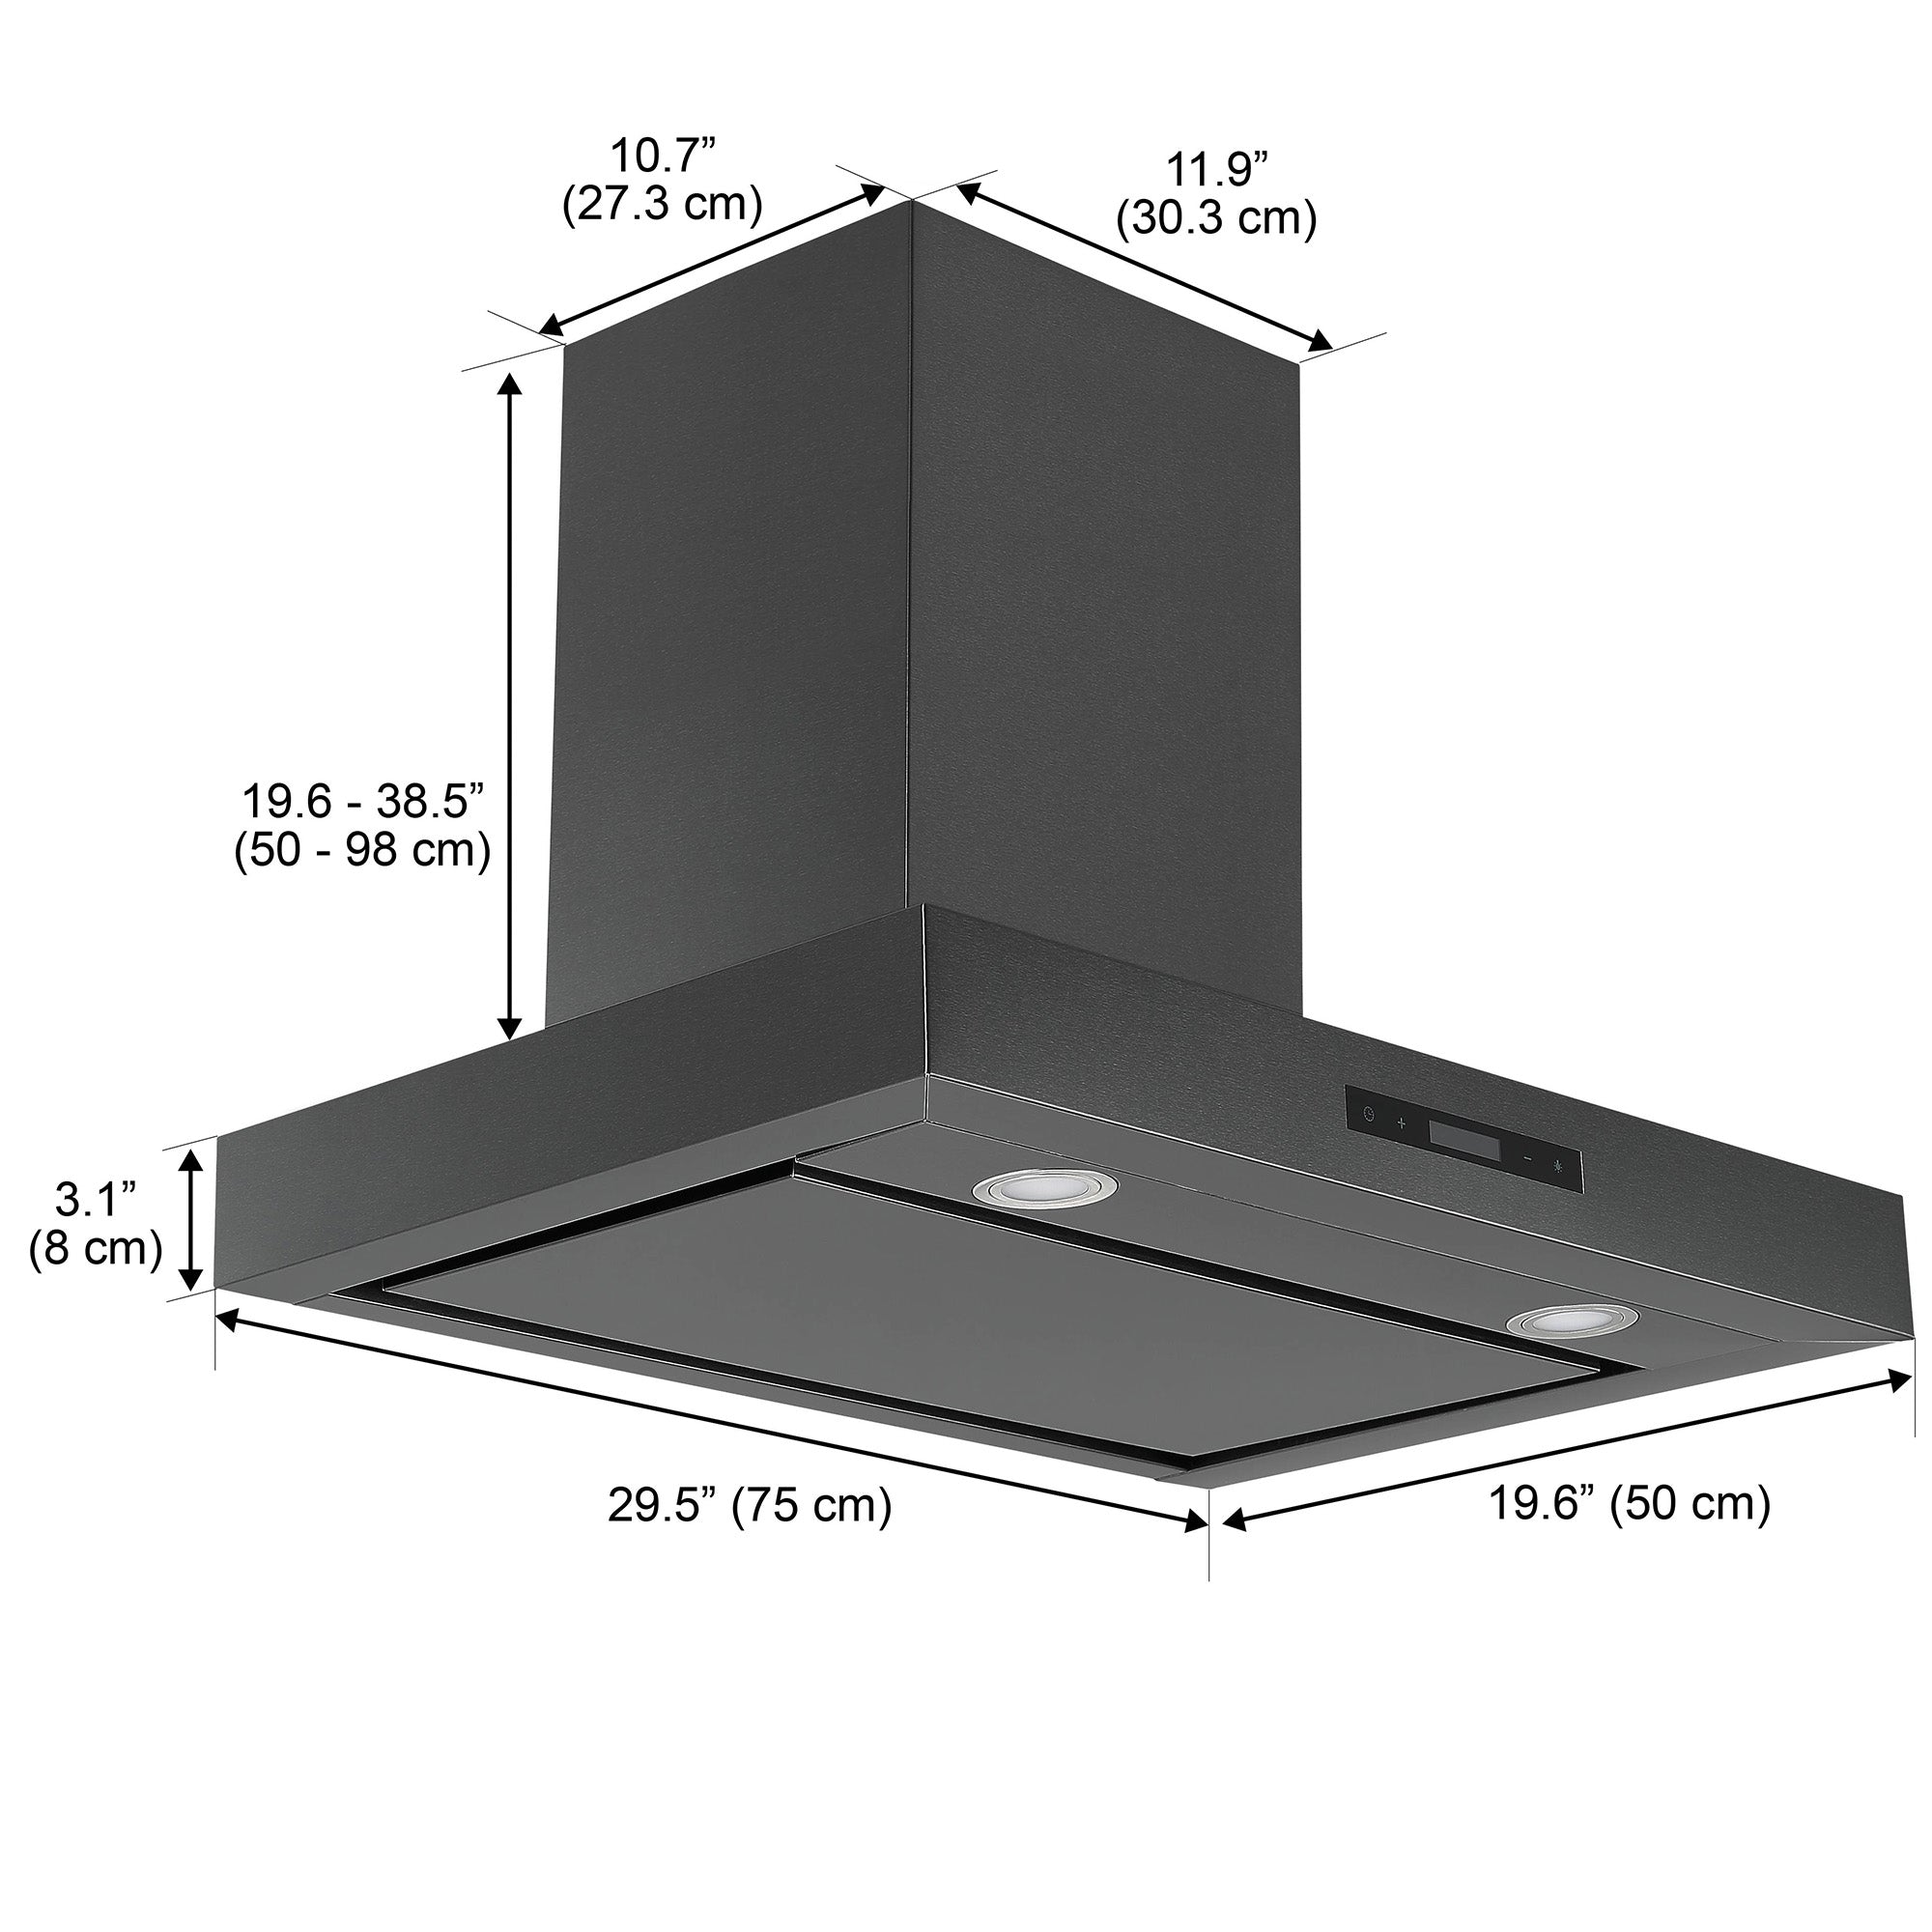 Ancona 30 in. Convertible Wall Mount Rectangular Style Range Hood in Black Stainless Steel